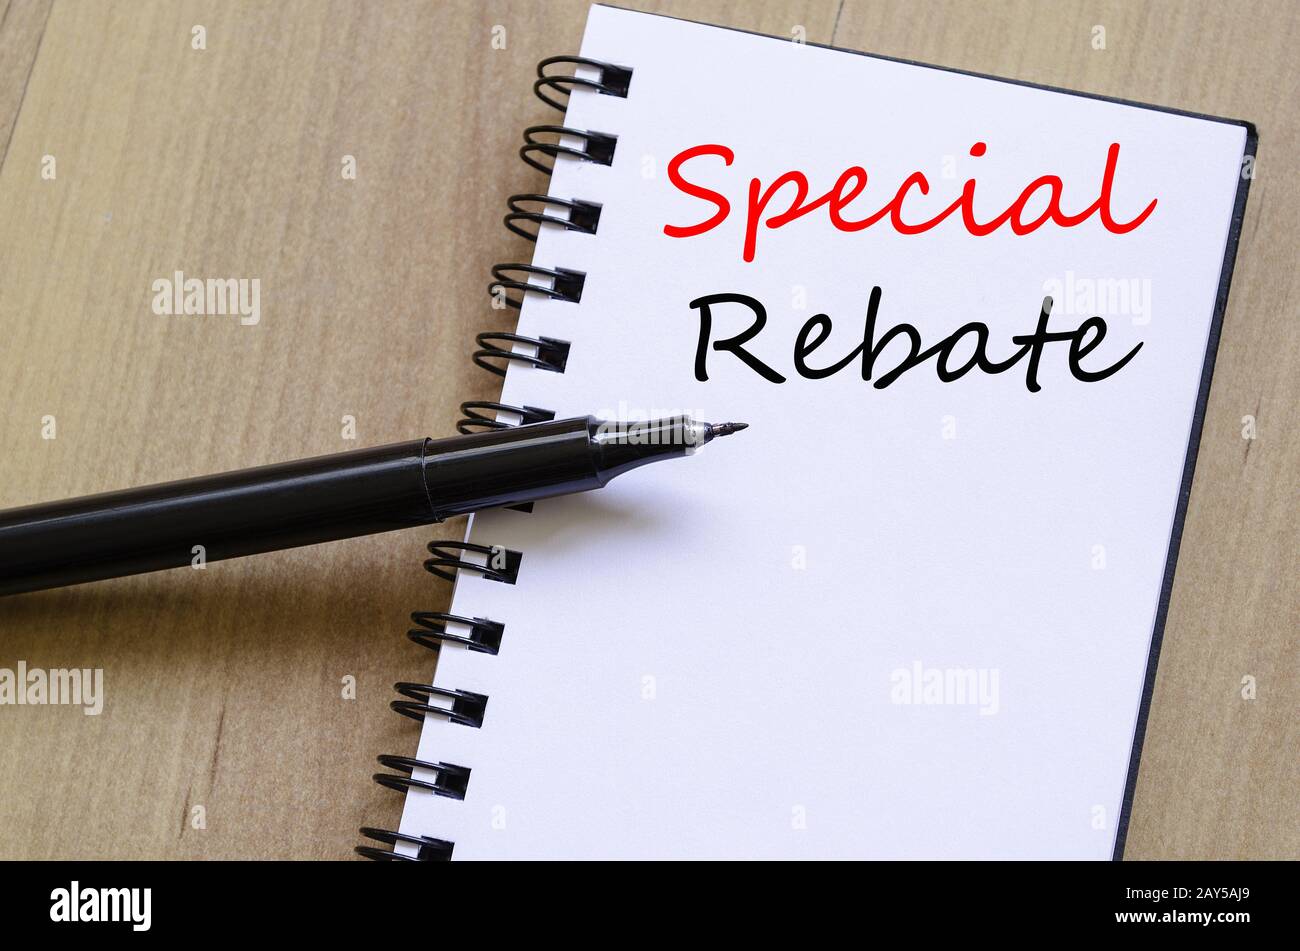 special-rebate-write-on-notebook-stock-photo-alamy